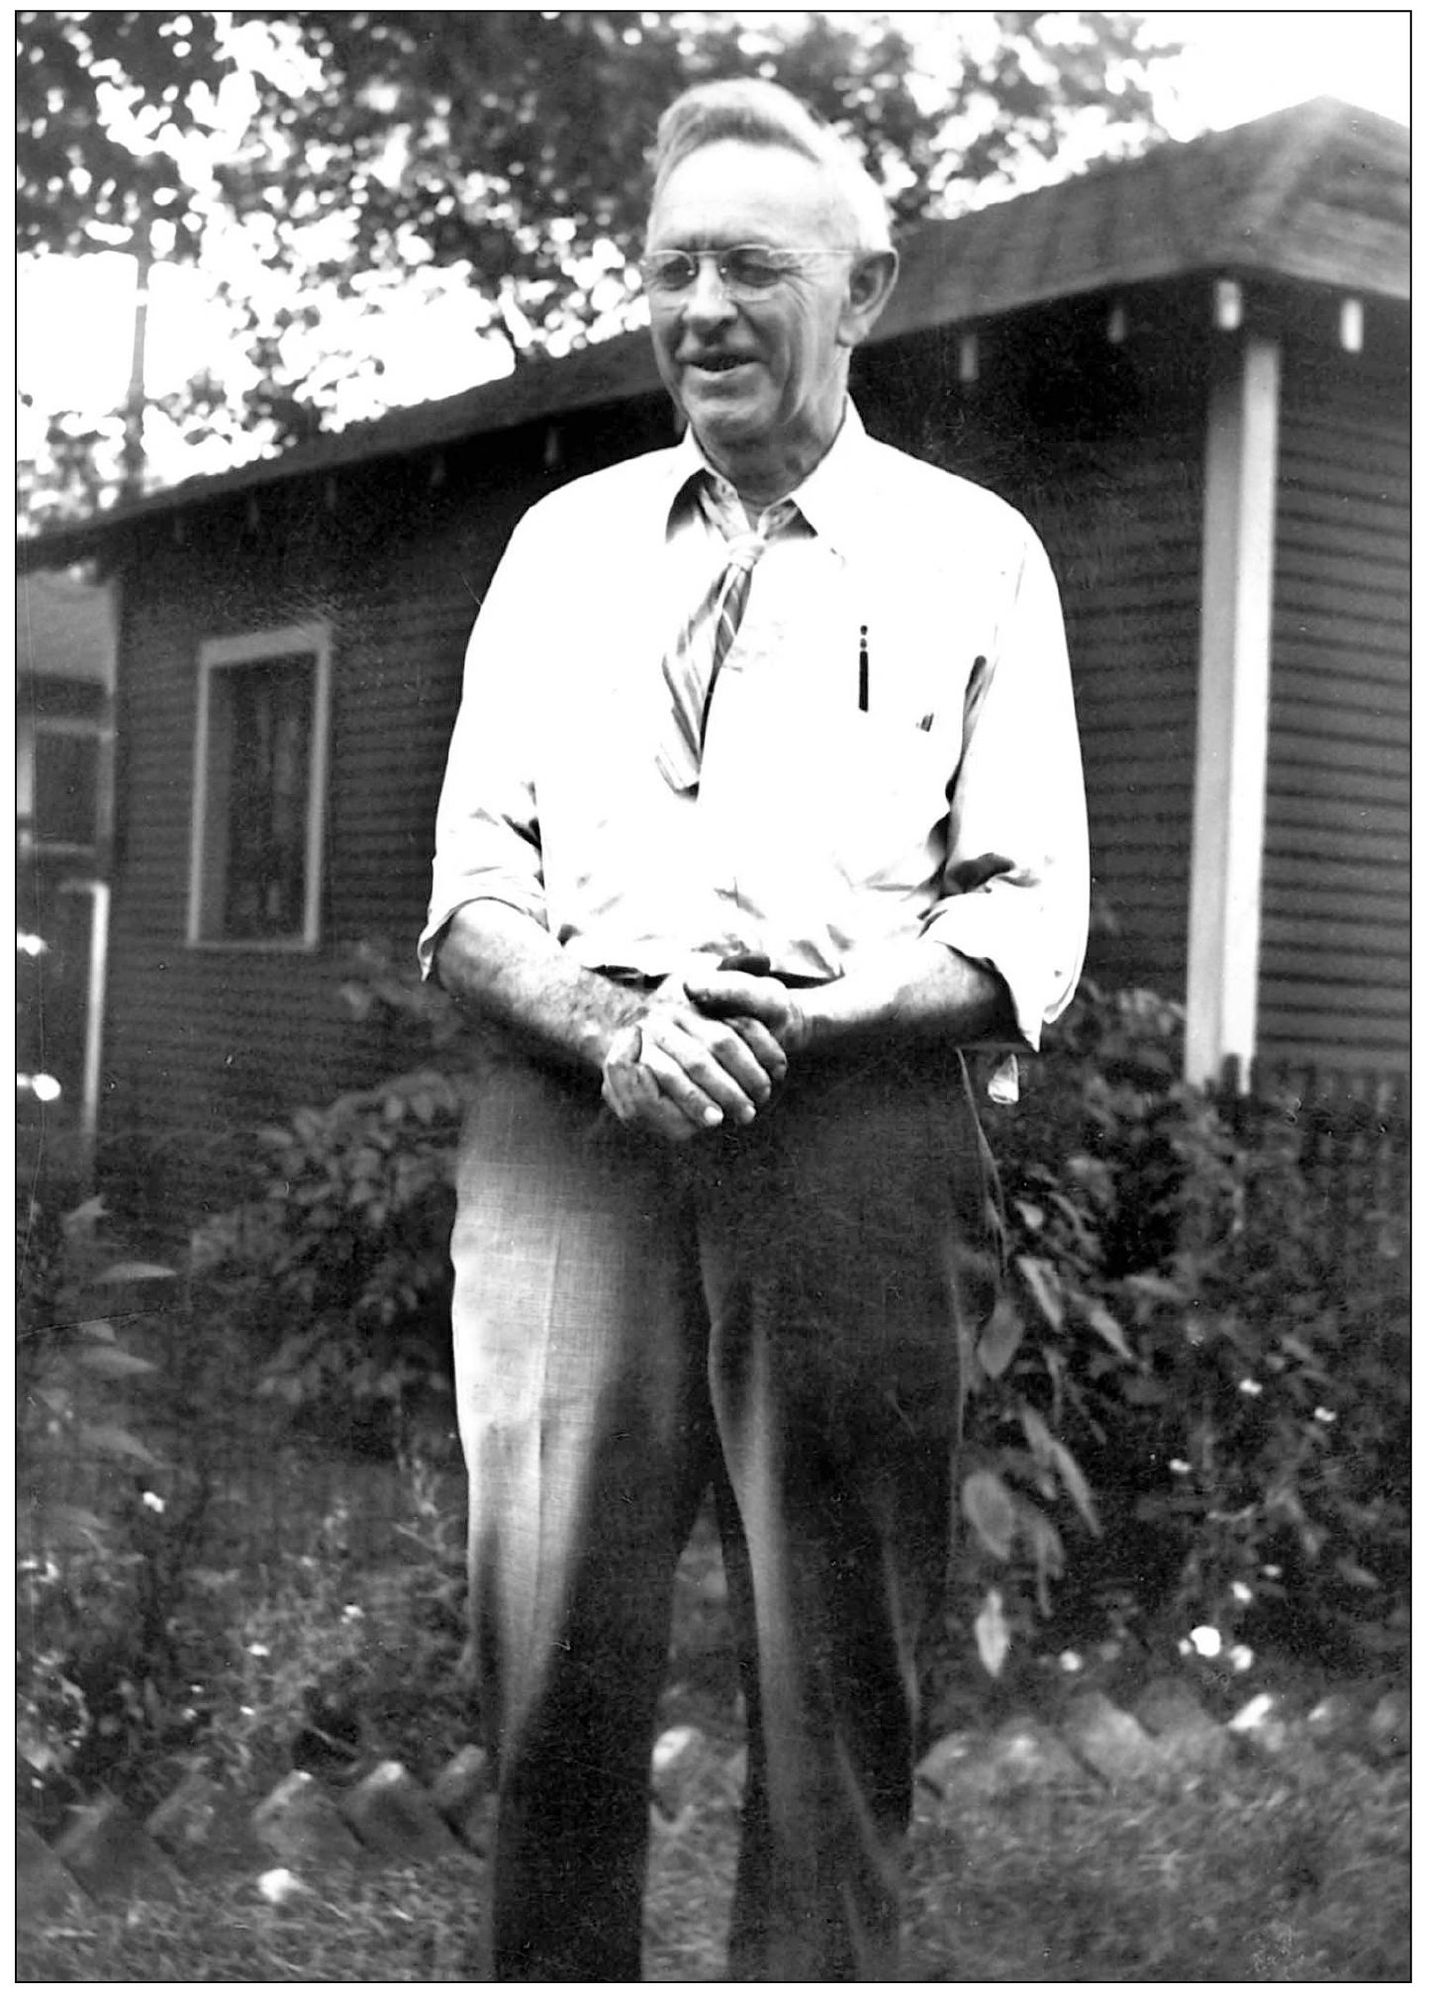 Frank P Thomas Sr was 75 years old when this picture was taken in 1951 By - photo 4